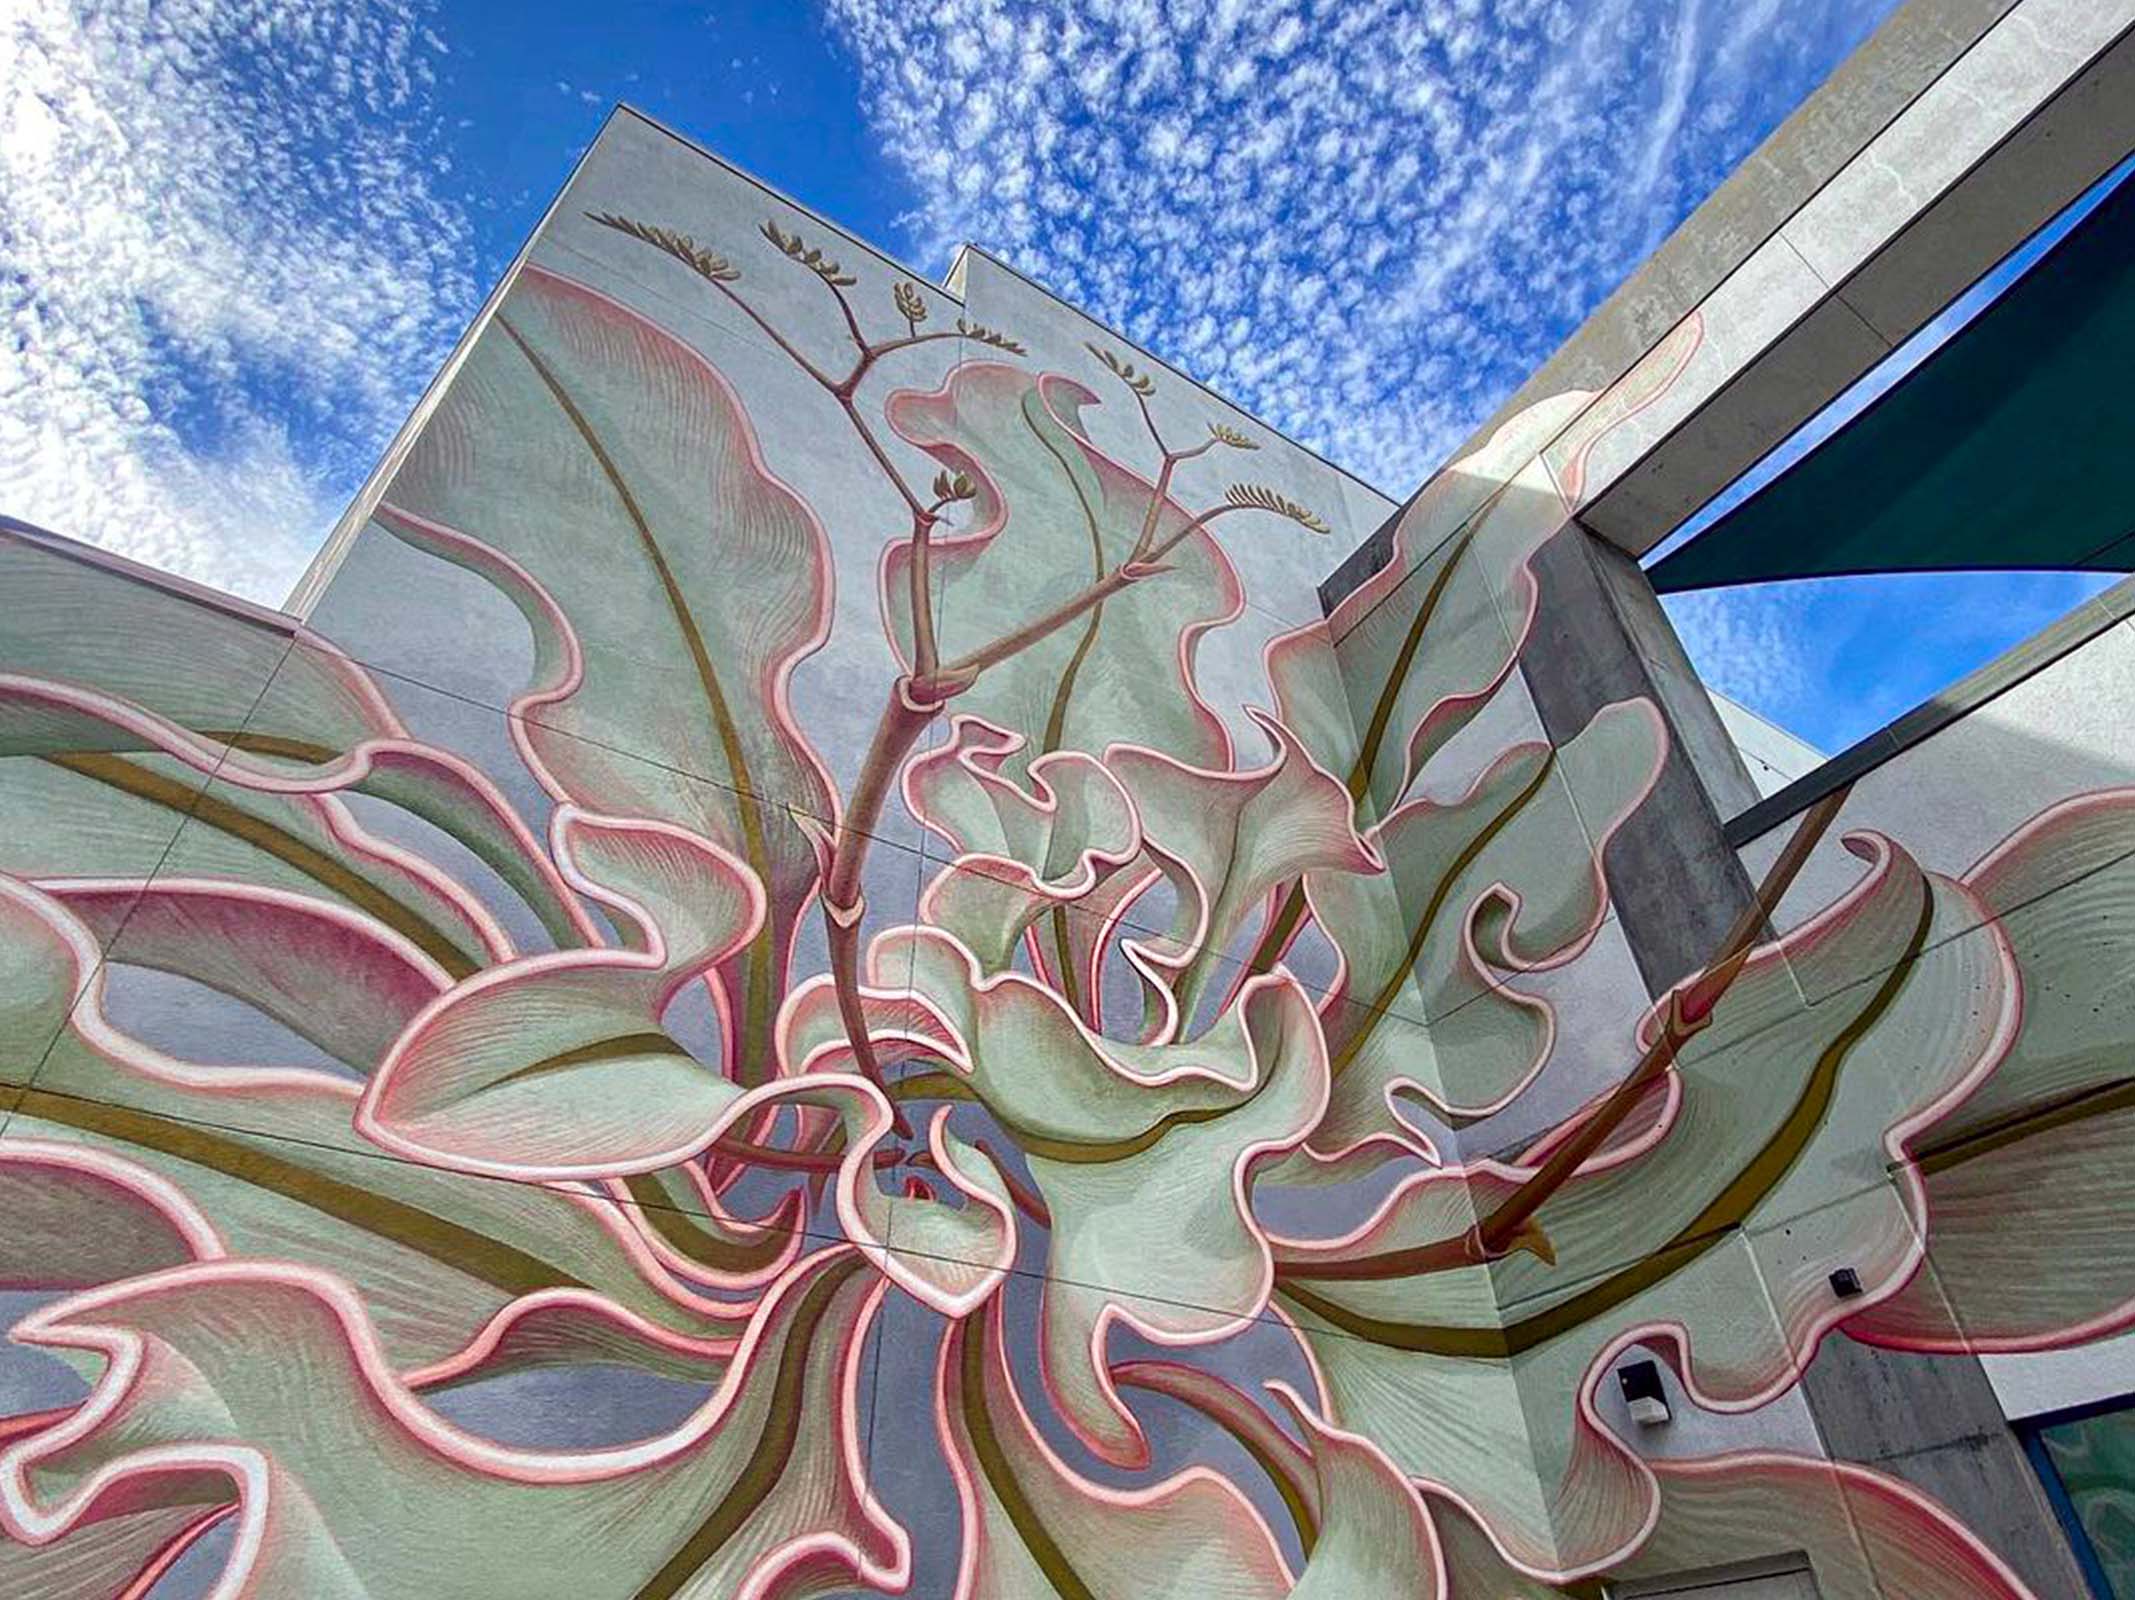 talented-artist-mona-caron-branches-out-a-massive-limonium-flower-mural-on-a-building-featured